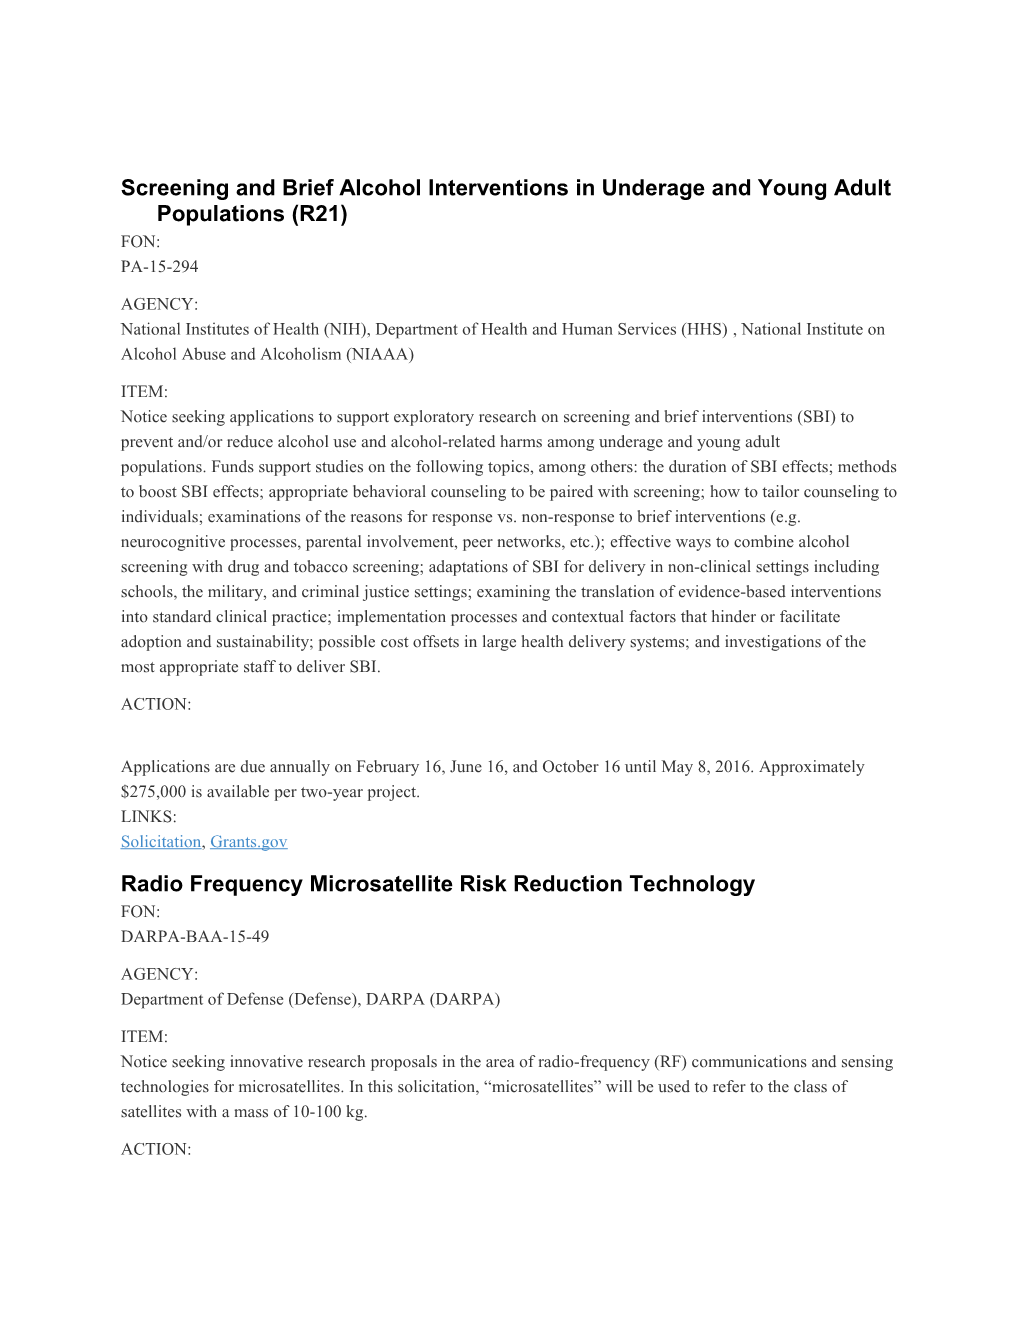 Screening and Brief Alcohol Interventions in Underage and Young Adult Populations (R21)